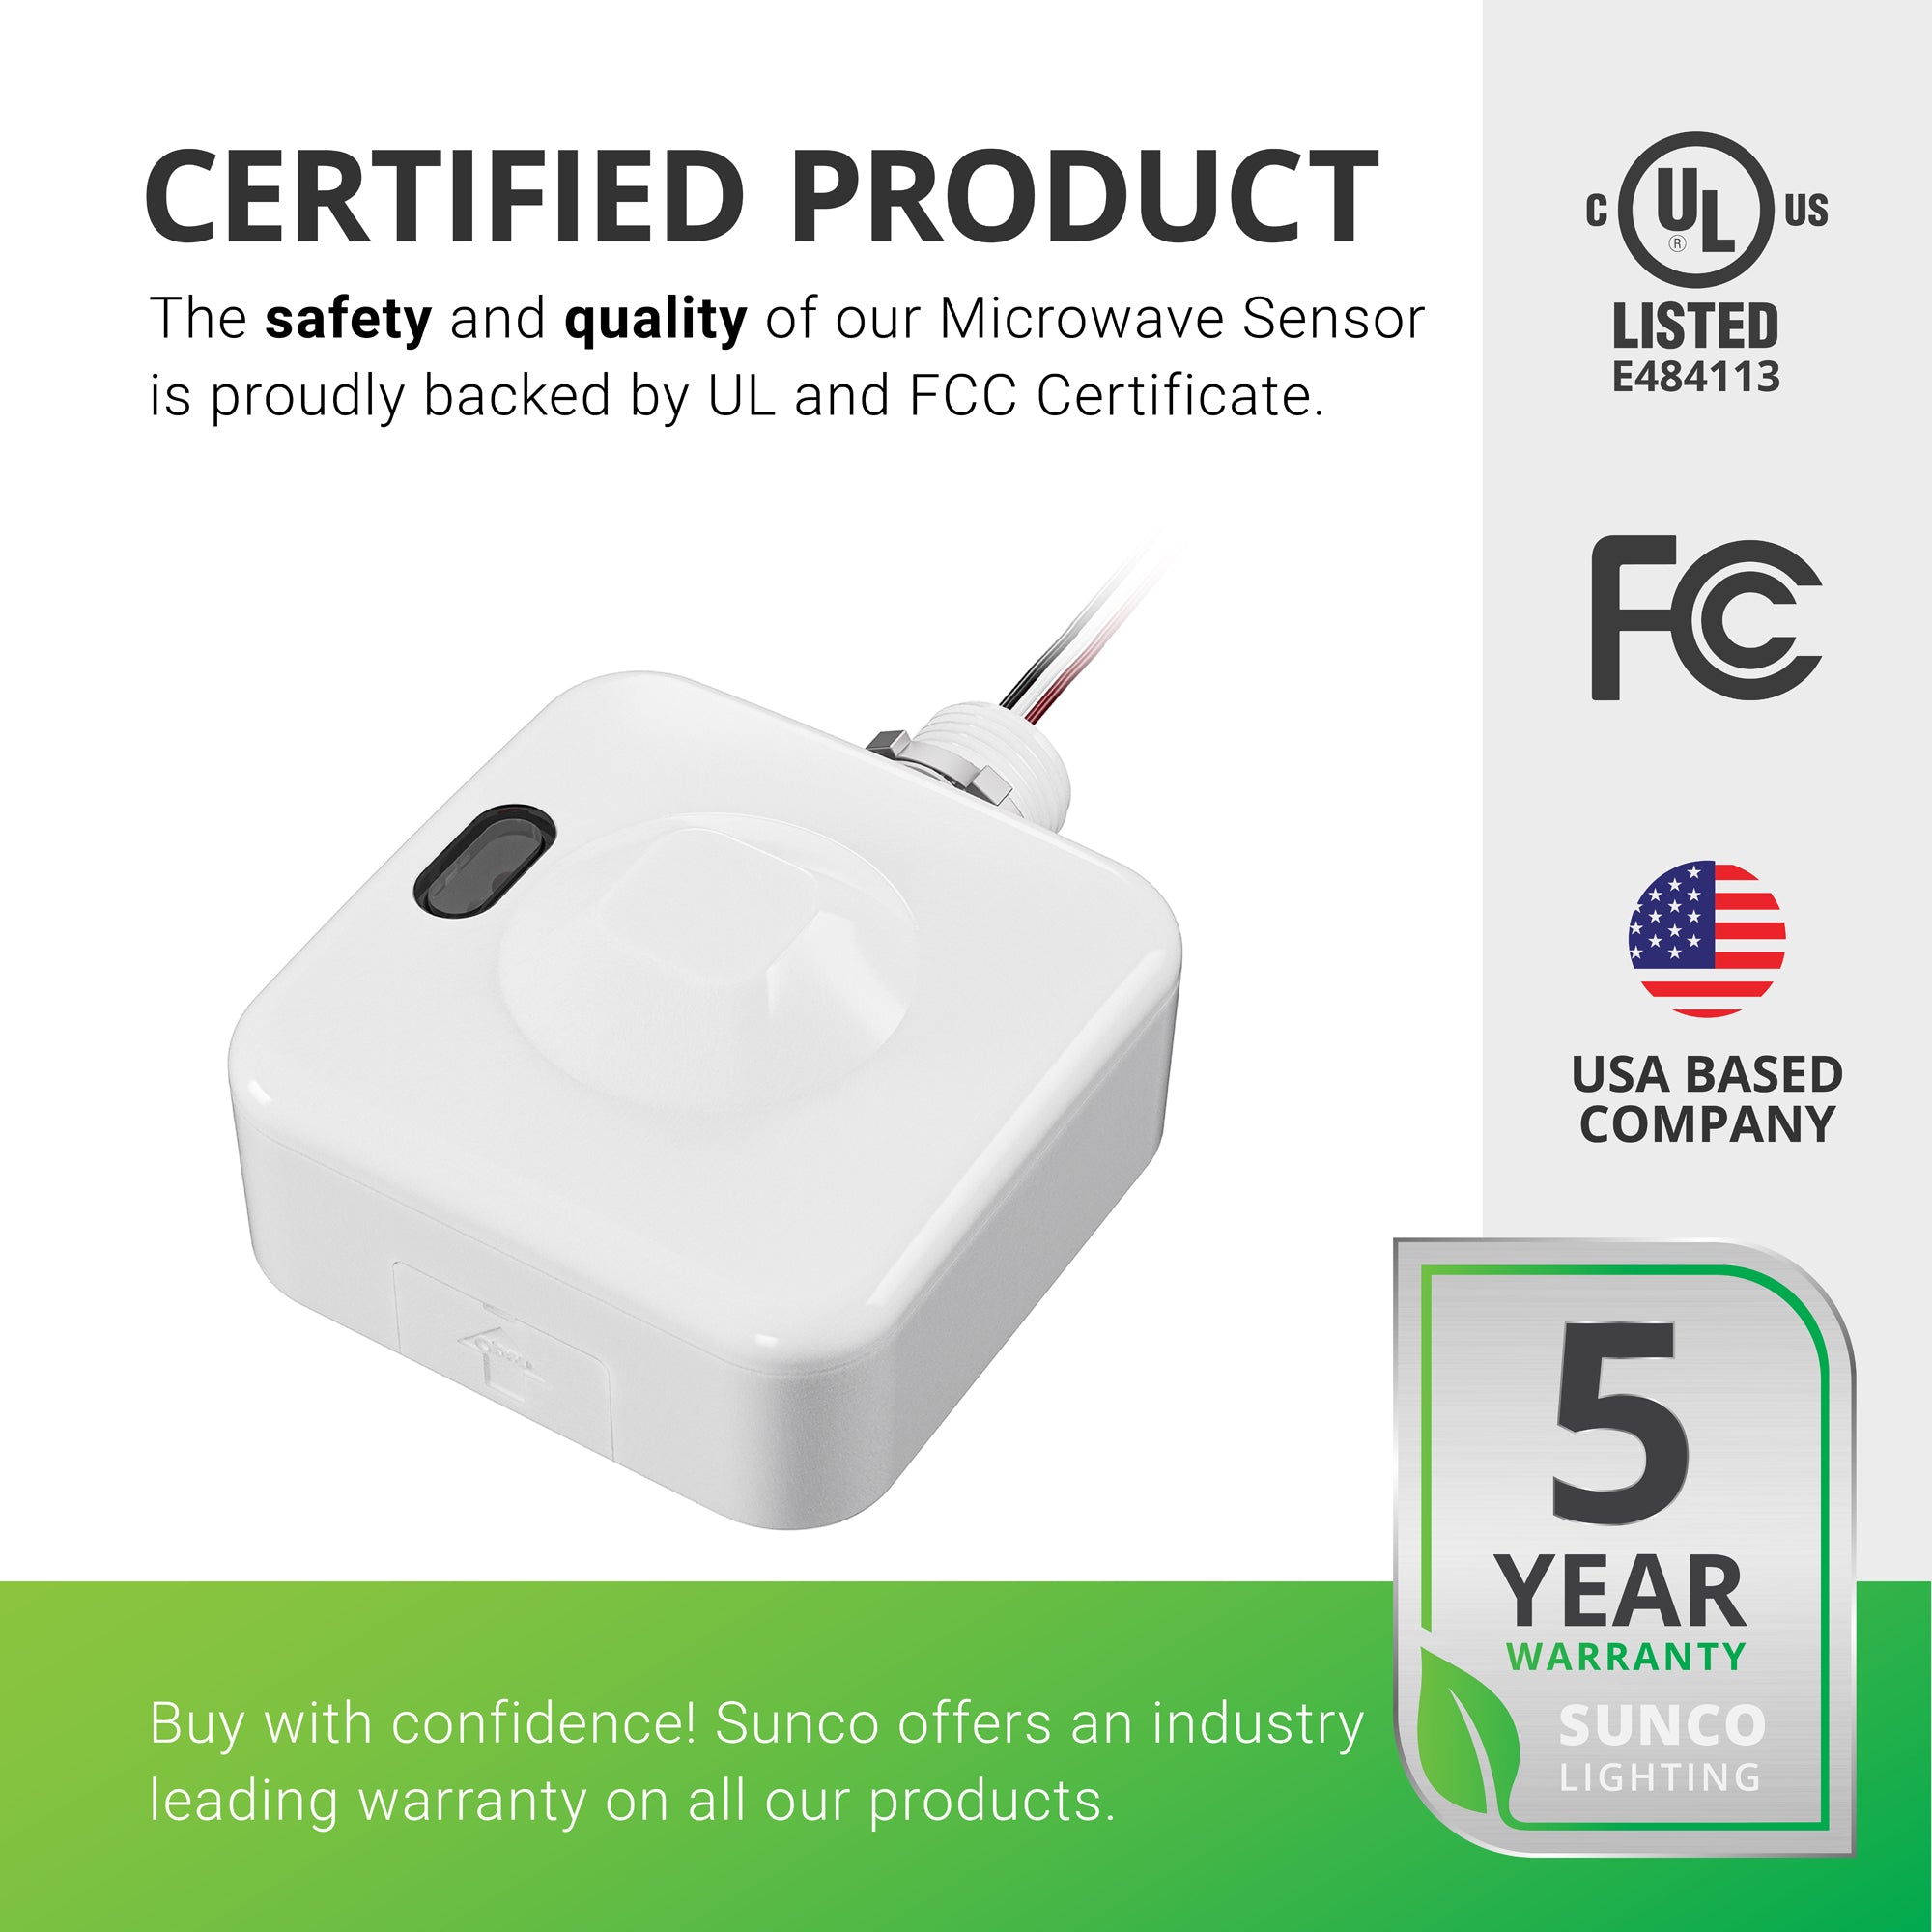 Certified Product. The safety and quality of our Microwave Sensor for Linear High Bays is proudly backed by UL and FCC certificates. Sunco is America owned and operated. Sunco offers an industry leading warranty on all our products. This sensor has a 5-year warranty. The sensor is shown in this image. It would screw onto the LED Linear High Bay with the end knockout and secure with the threaded ring.